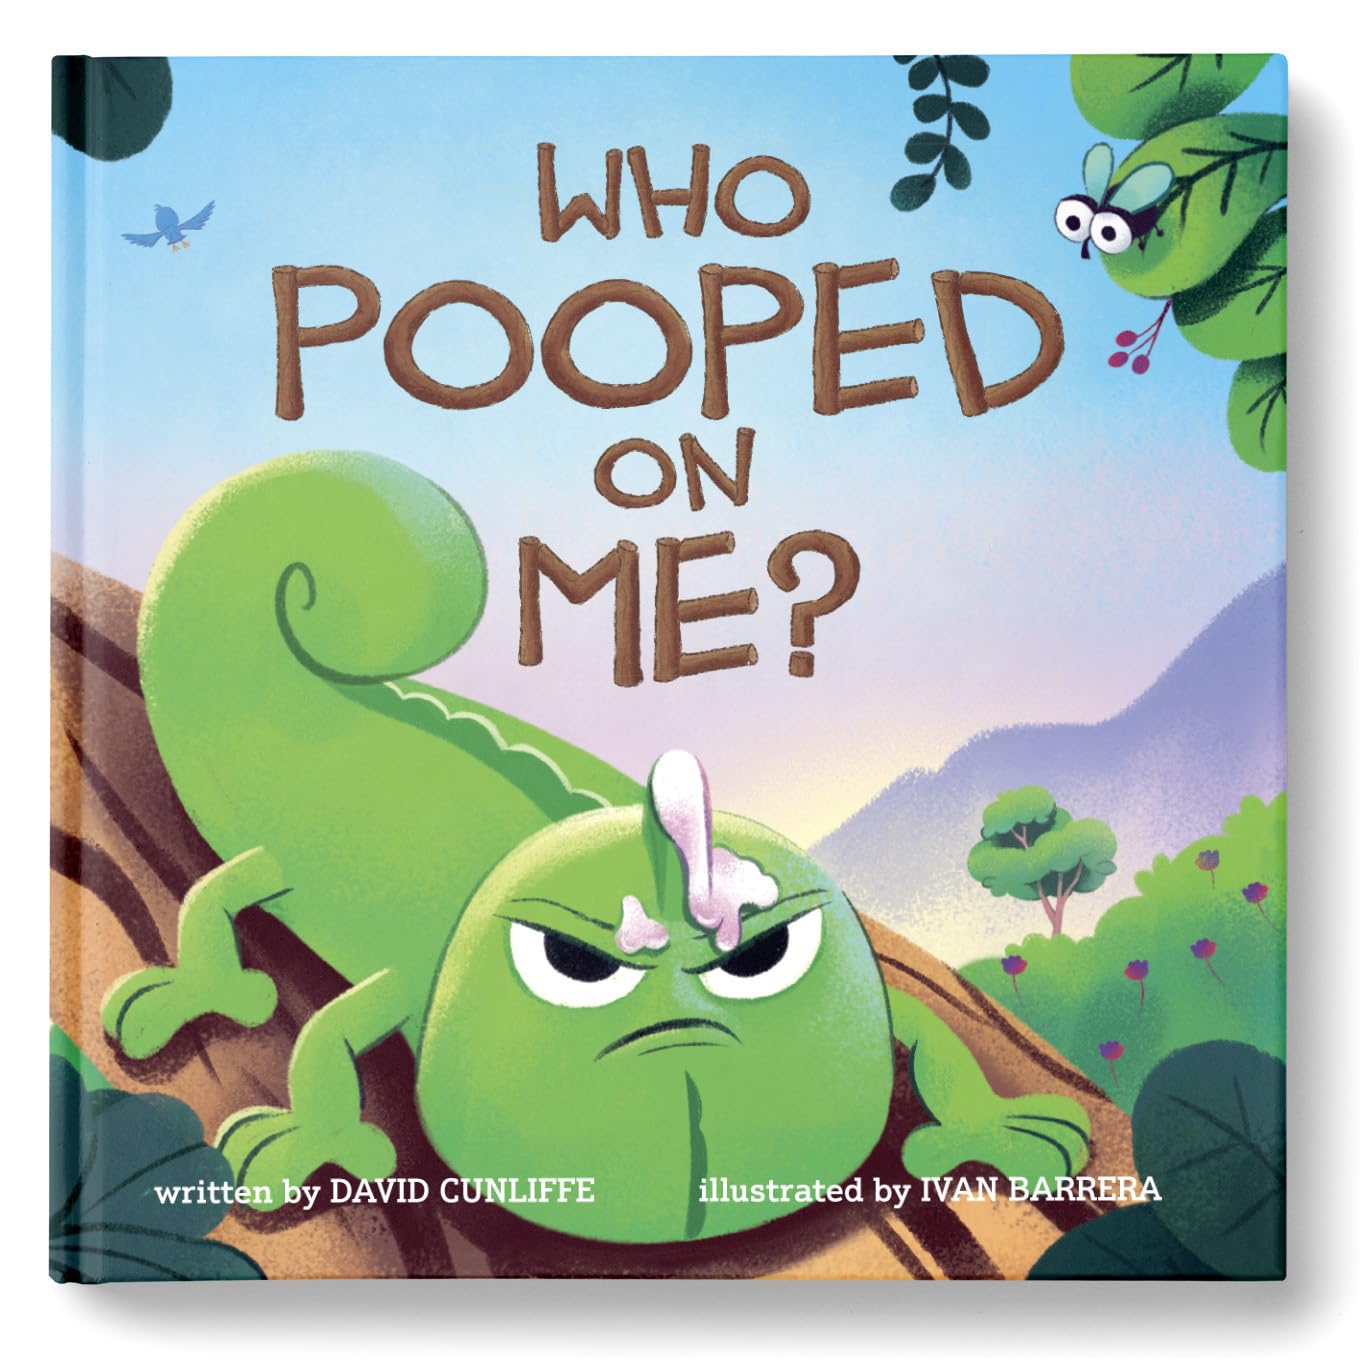 Who Pooped on Me?